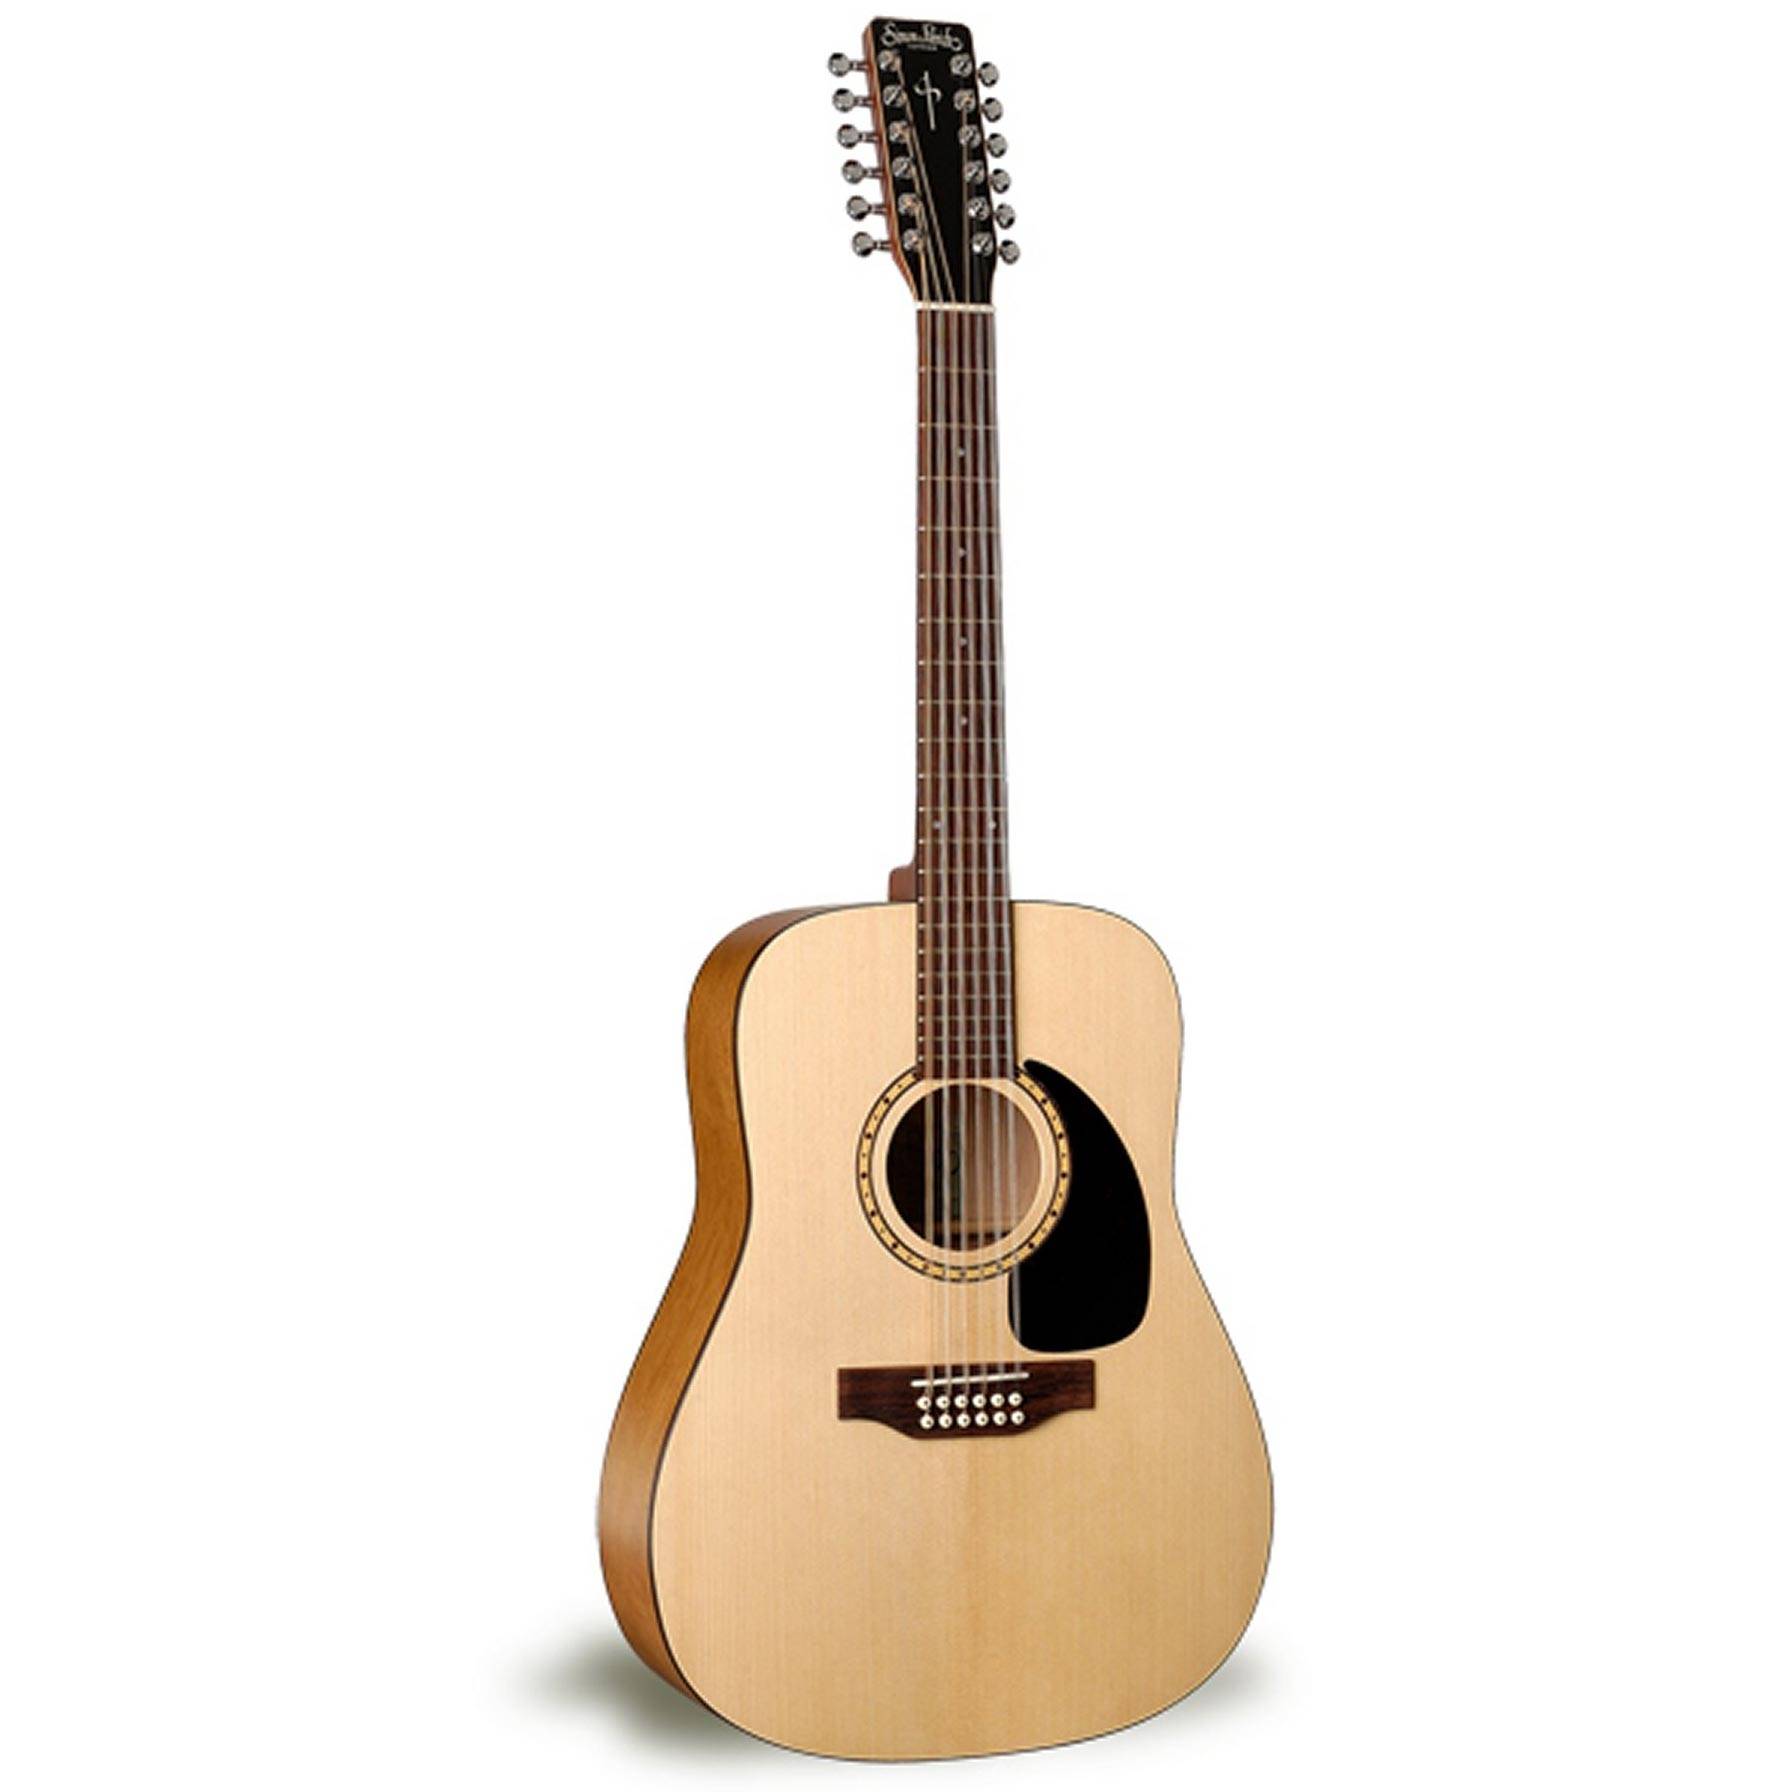 Simon & Patrick Woodland 12 Spruce Natural A3T Electric - Acoustic Guitar